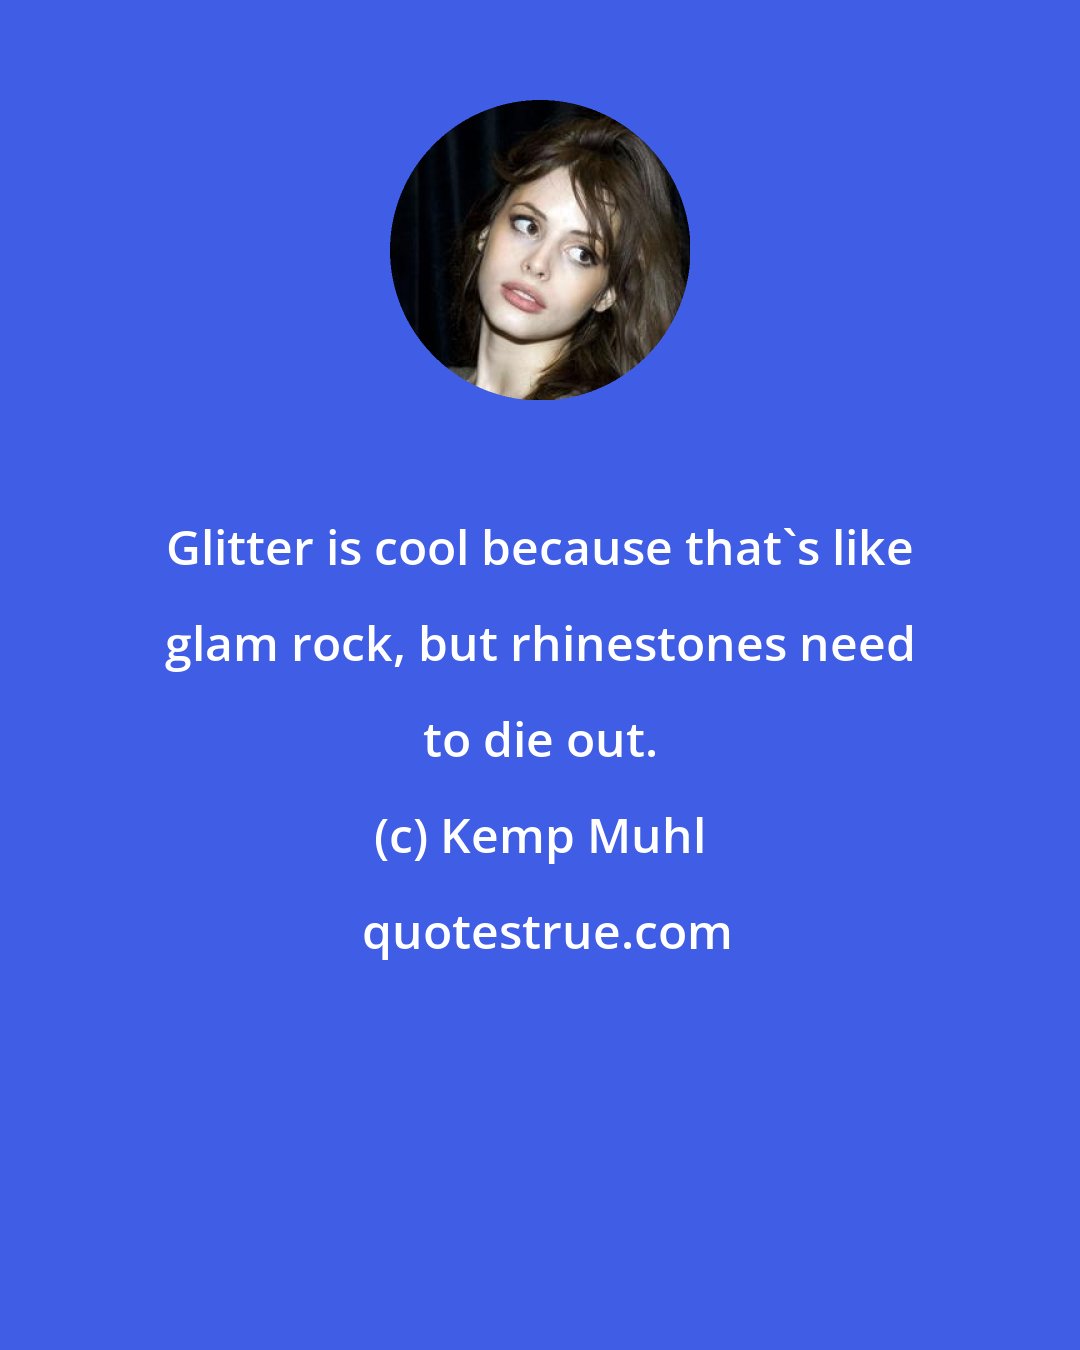 Kemp Muhl: Glitter is cool because that's like glam rock, but rhinestones need to die out.